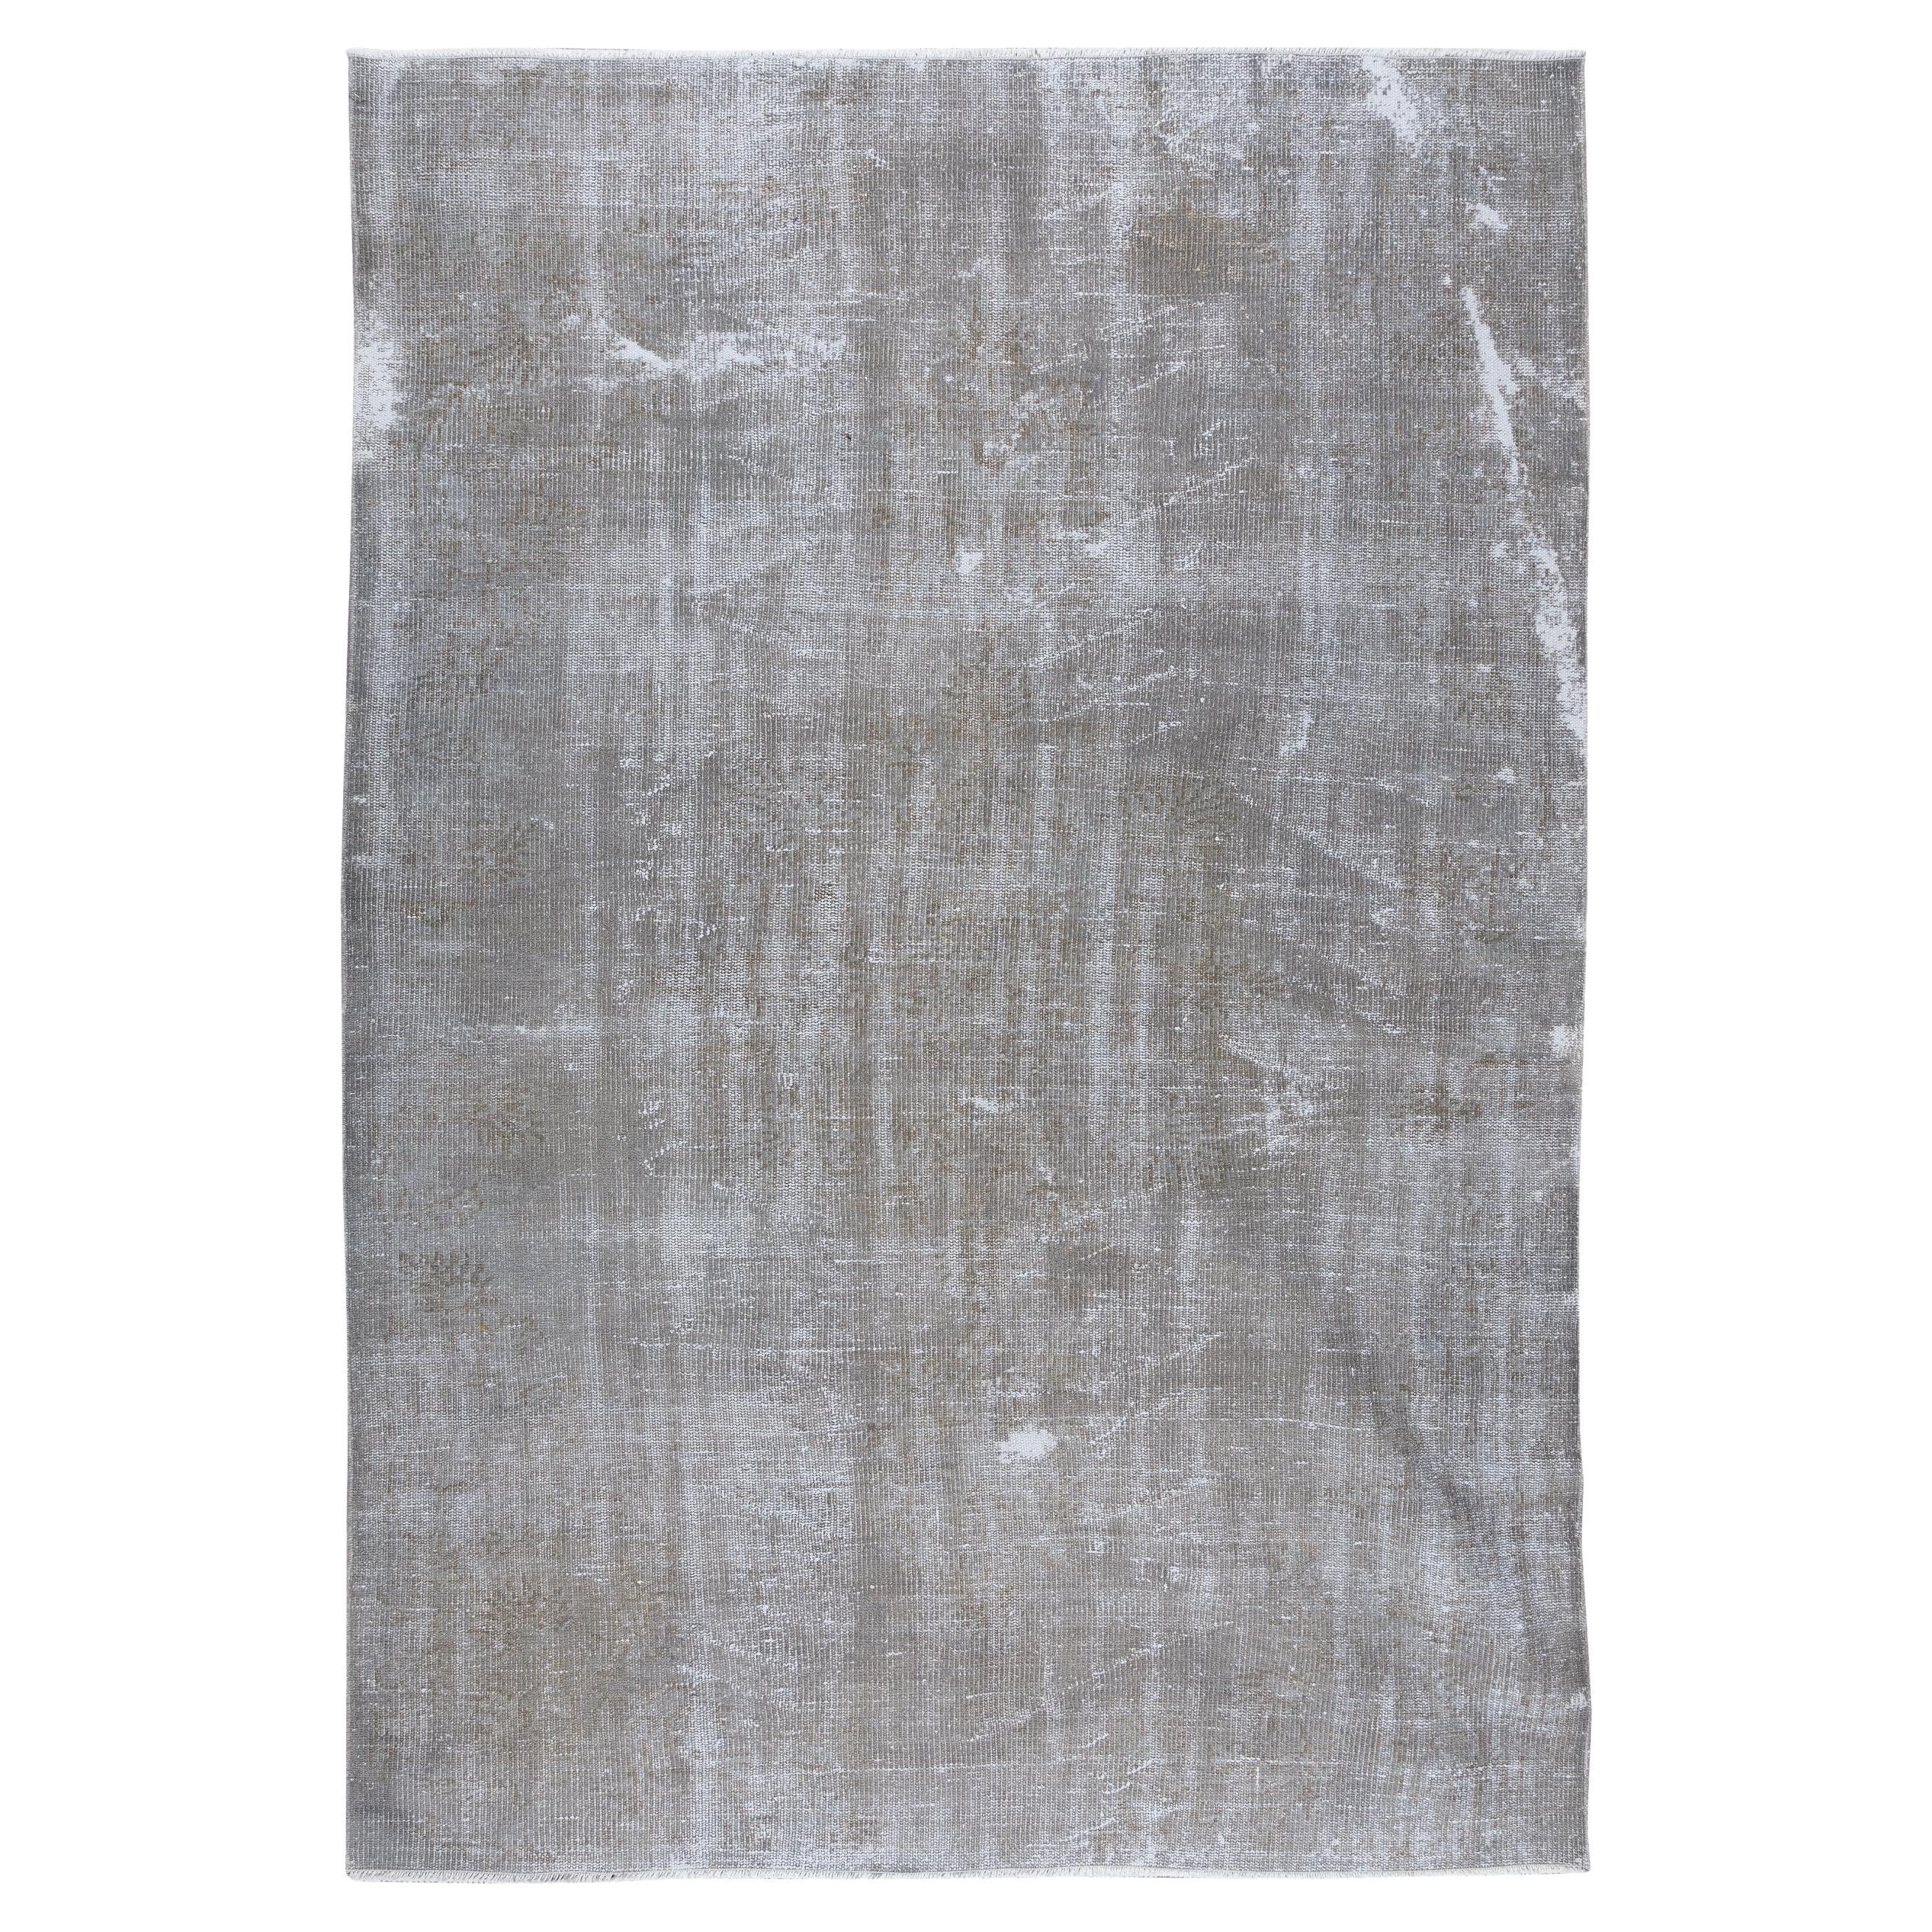 5.6x8 Ft Distressed 1960s Handmade Area Rug in Gray, Contemporary Turkish Carpet For Sale